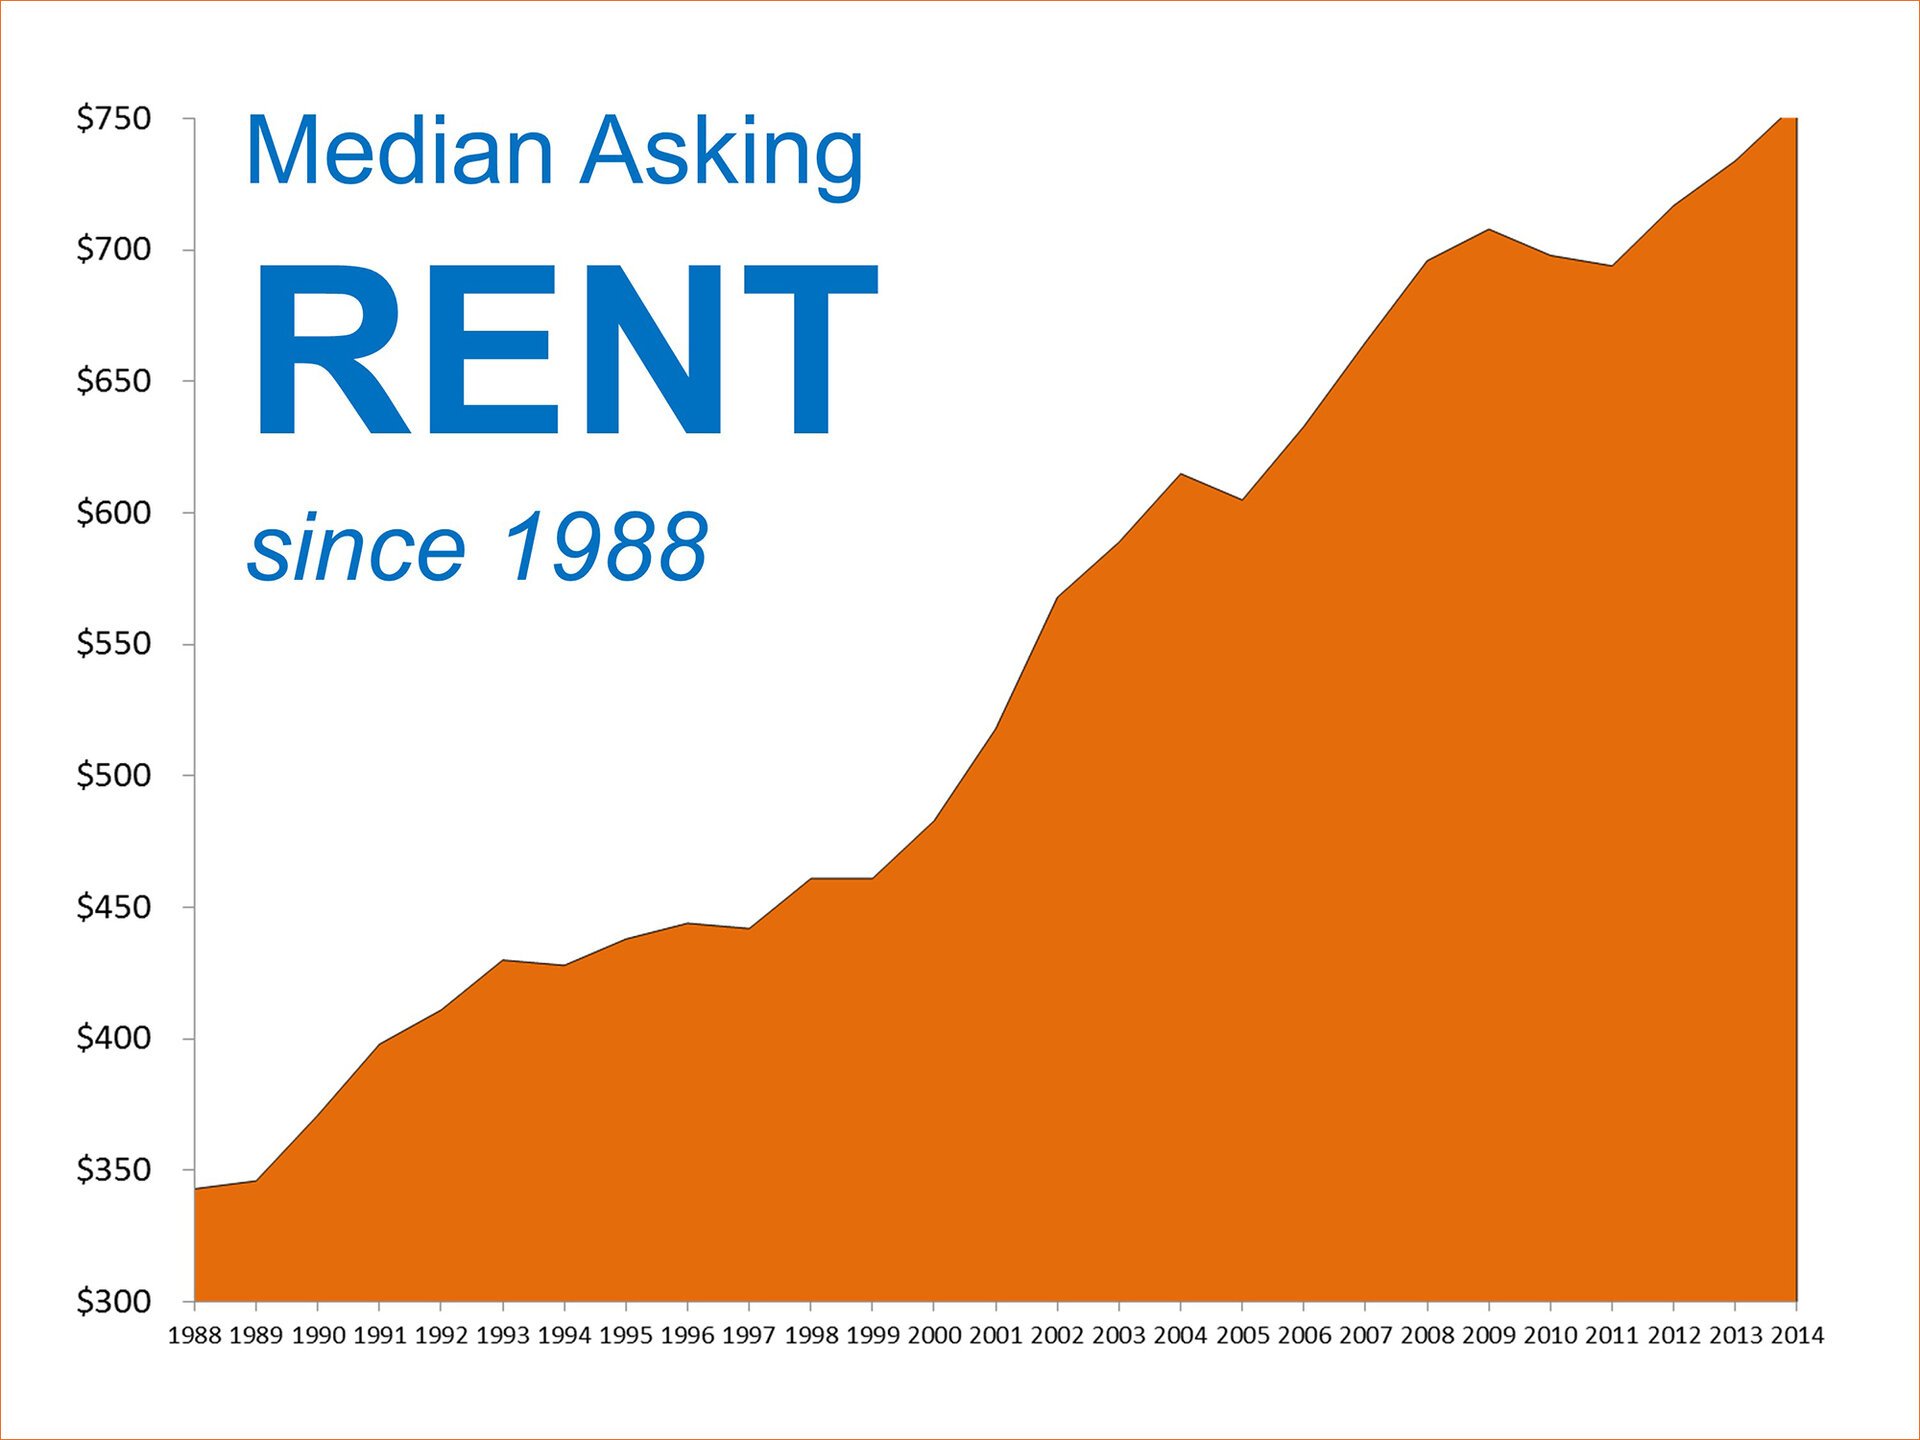 Median Asking Rent Since 1988 | Keeping Current Matters